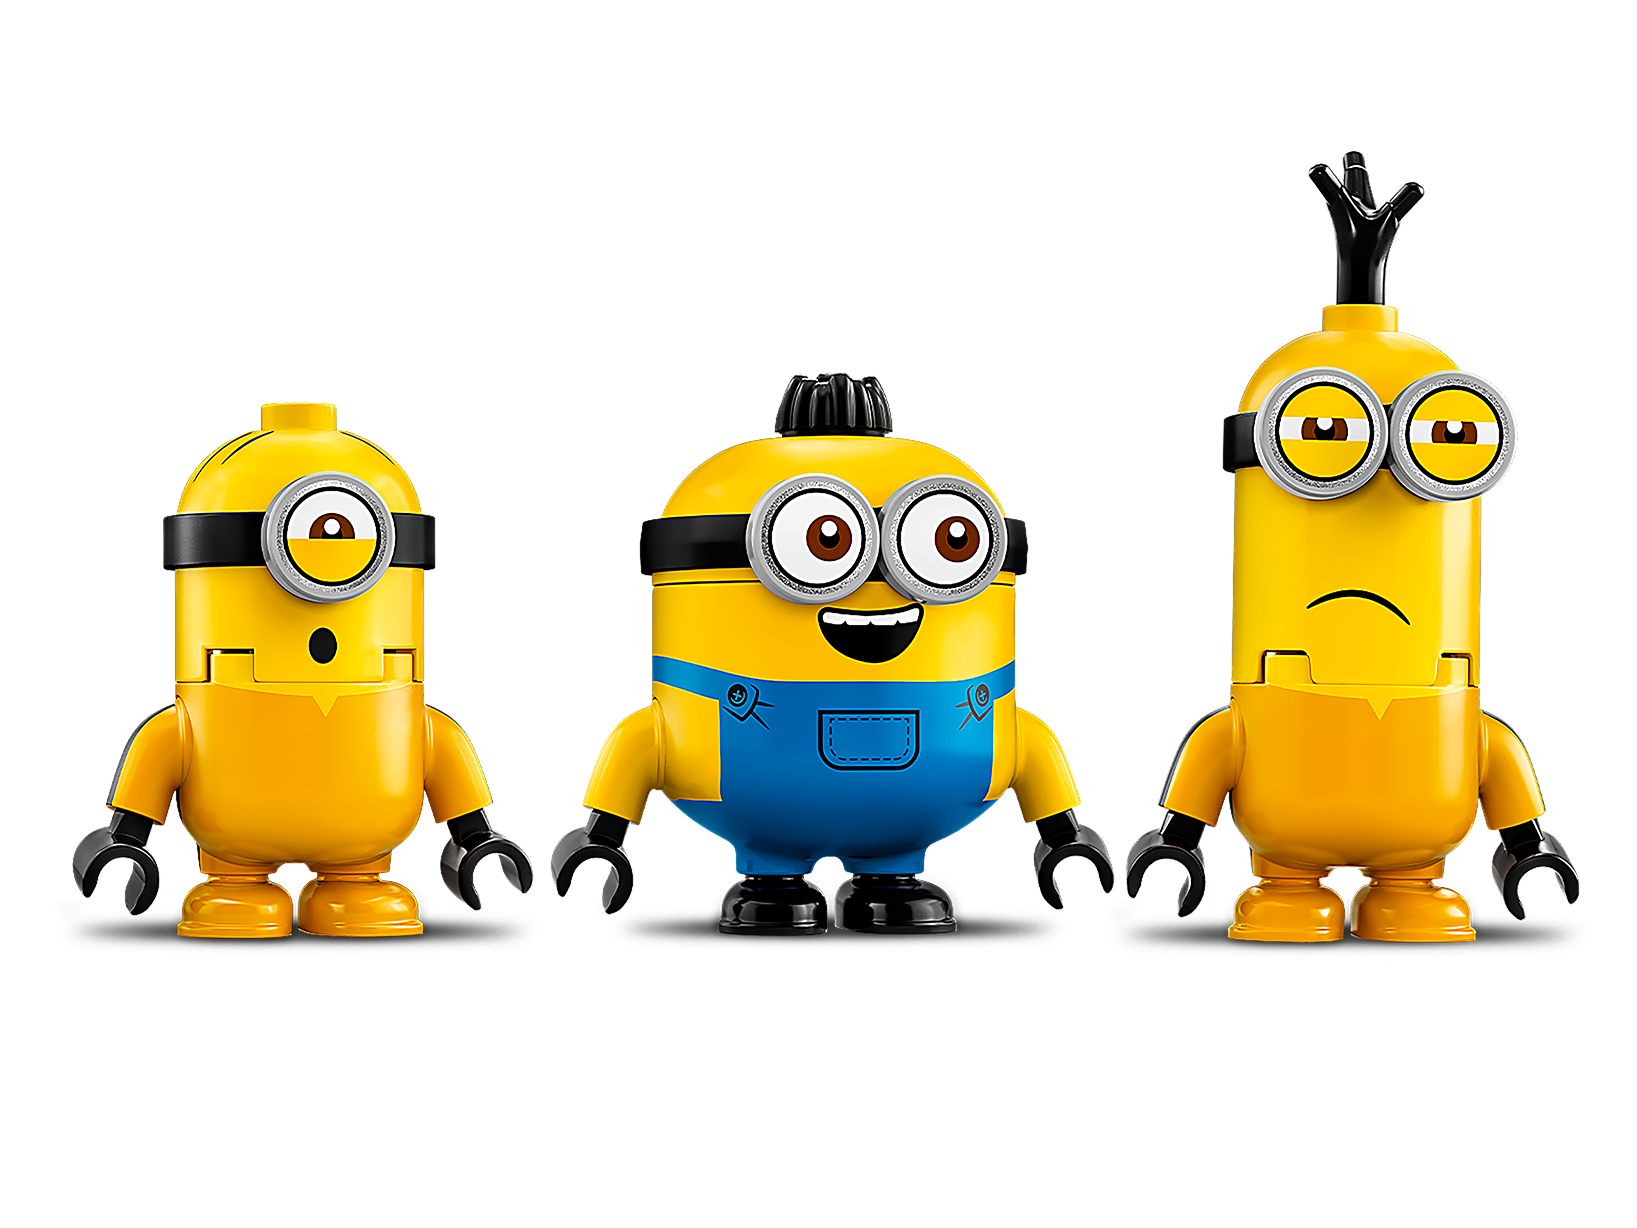 online US the at Official Shop Fu Kung Minions 75550 Buy Battle | | Minions LEGO®